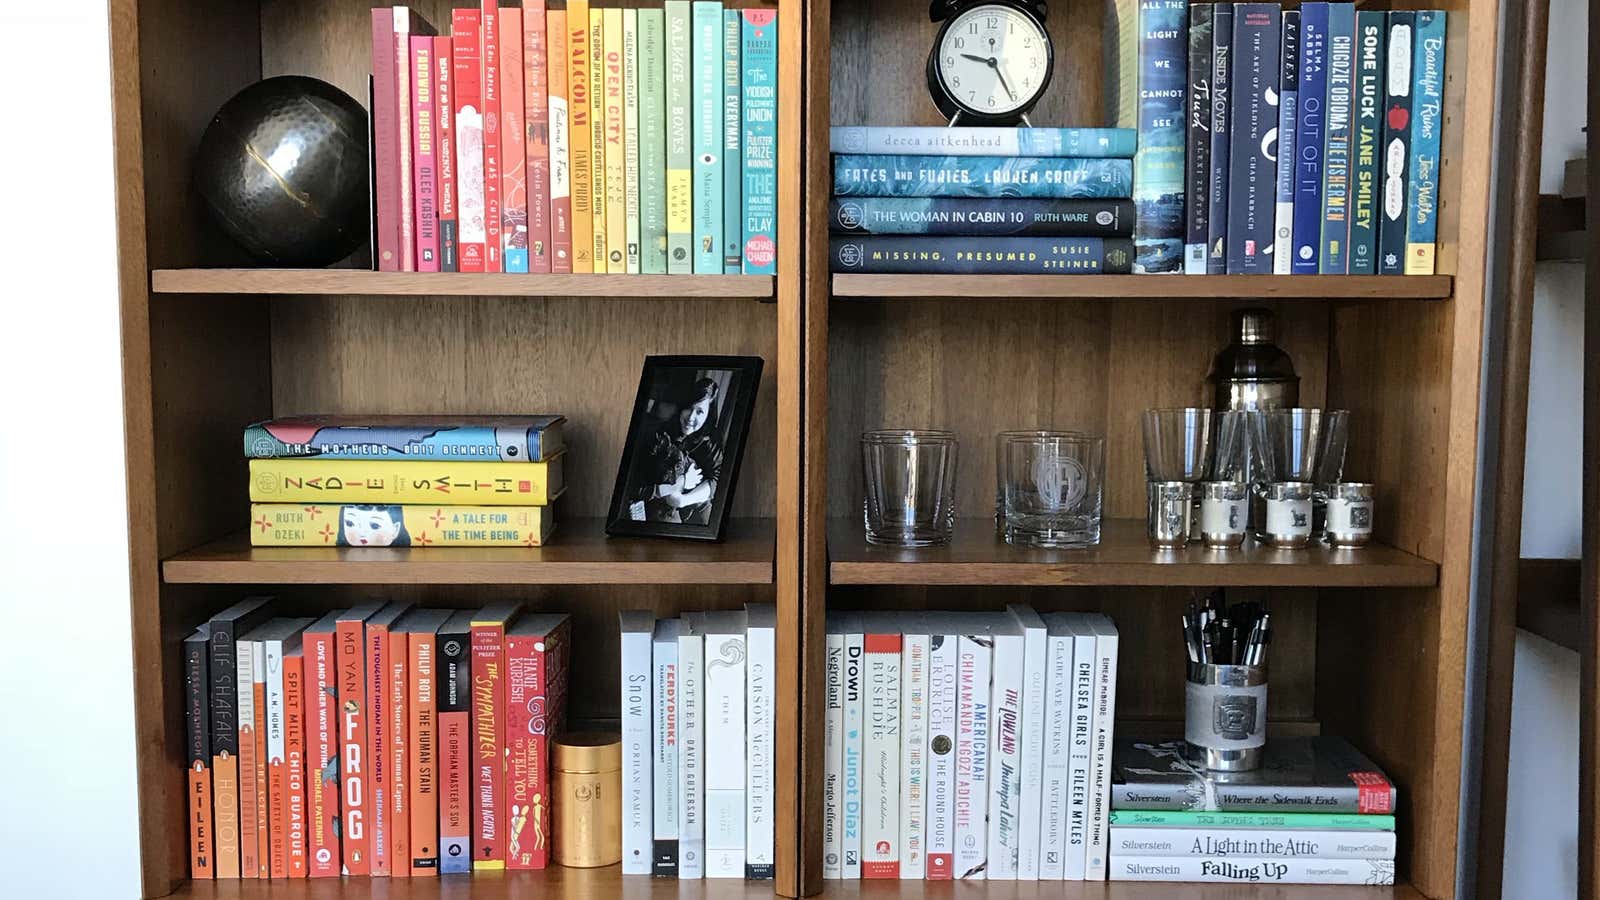 How to Organize Your Bookshelf - The Bookcase Beauty